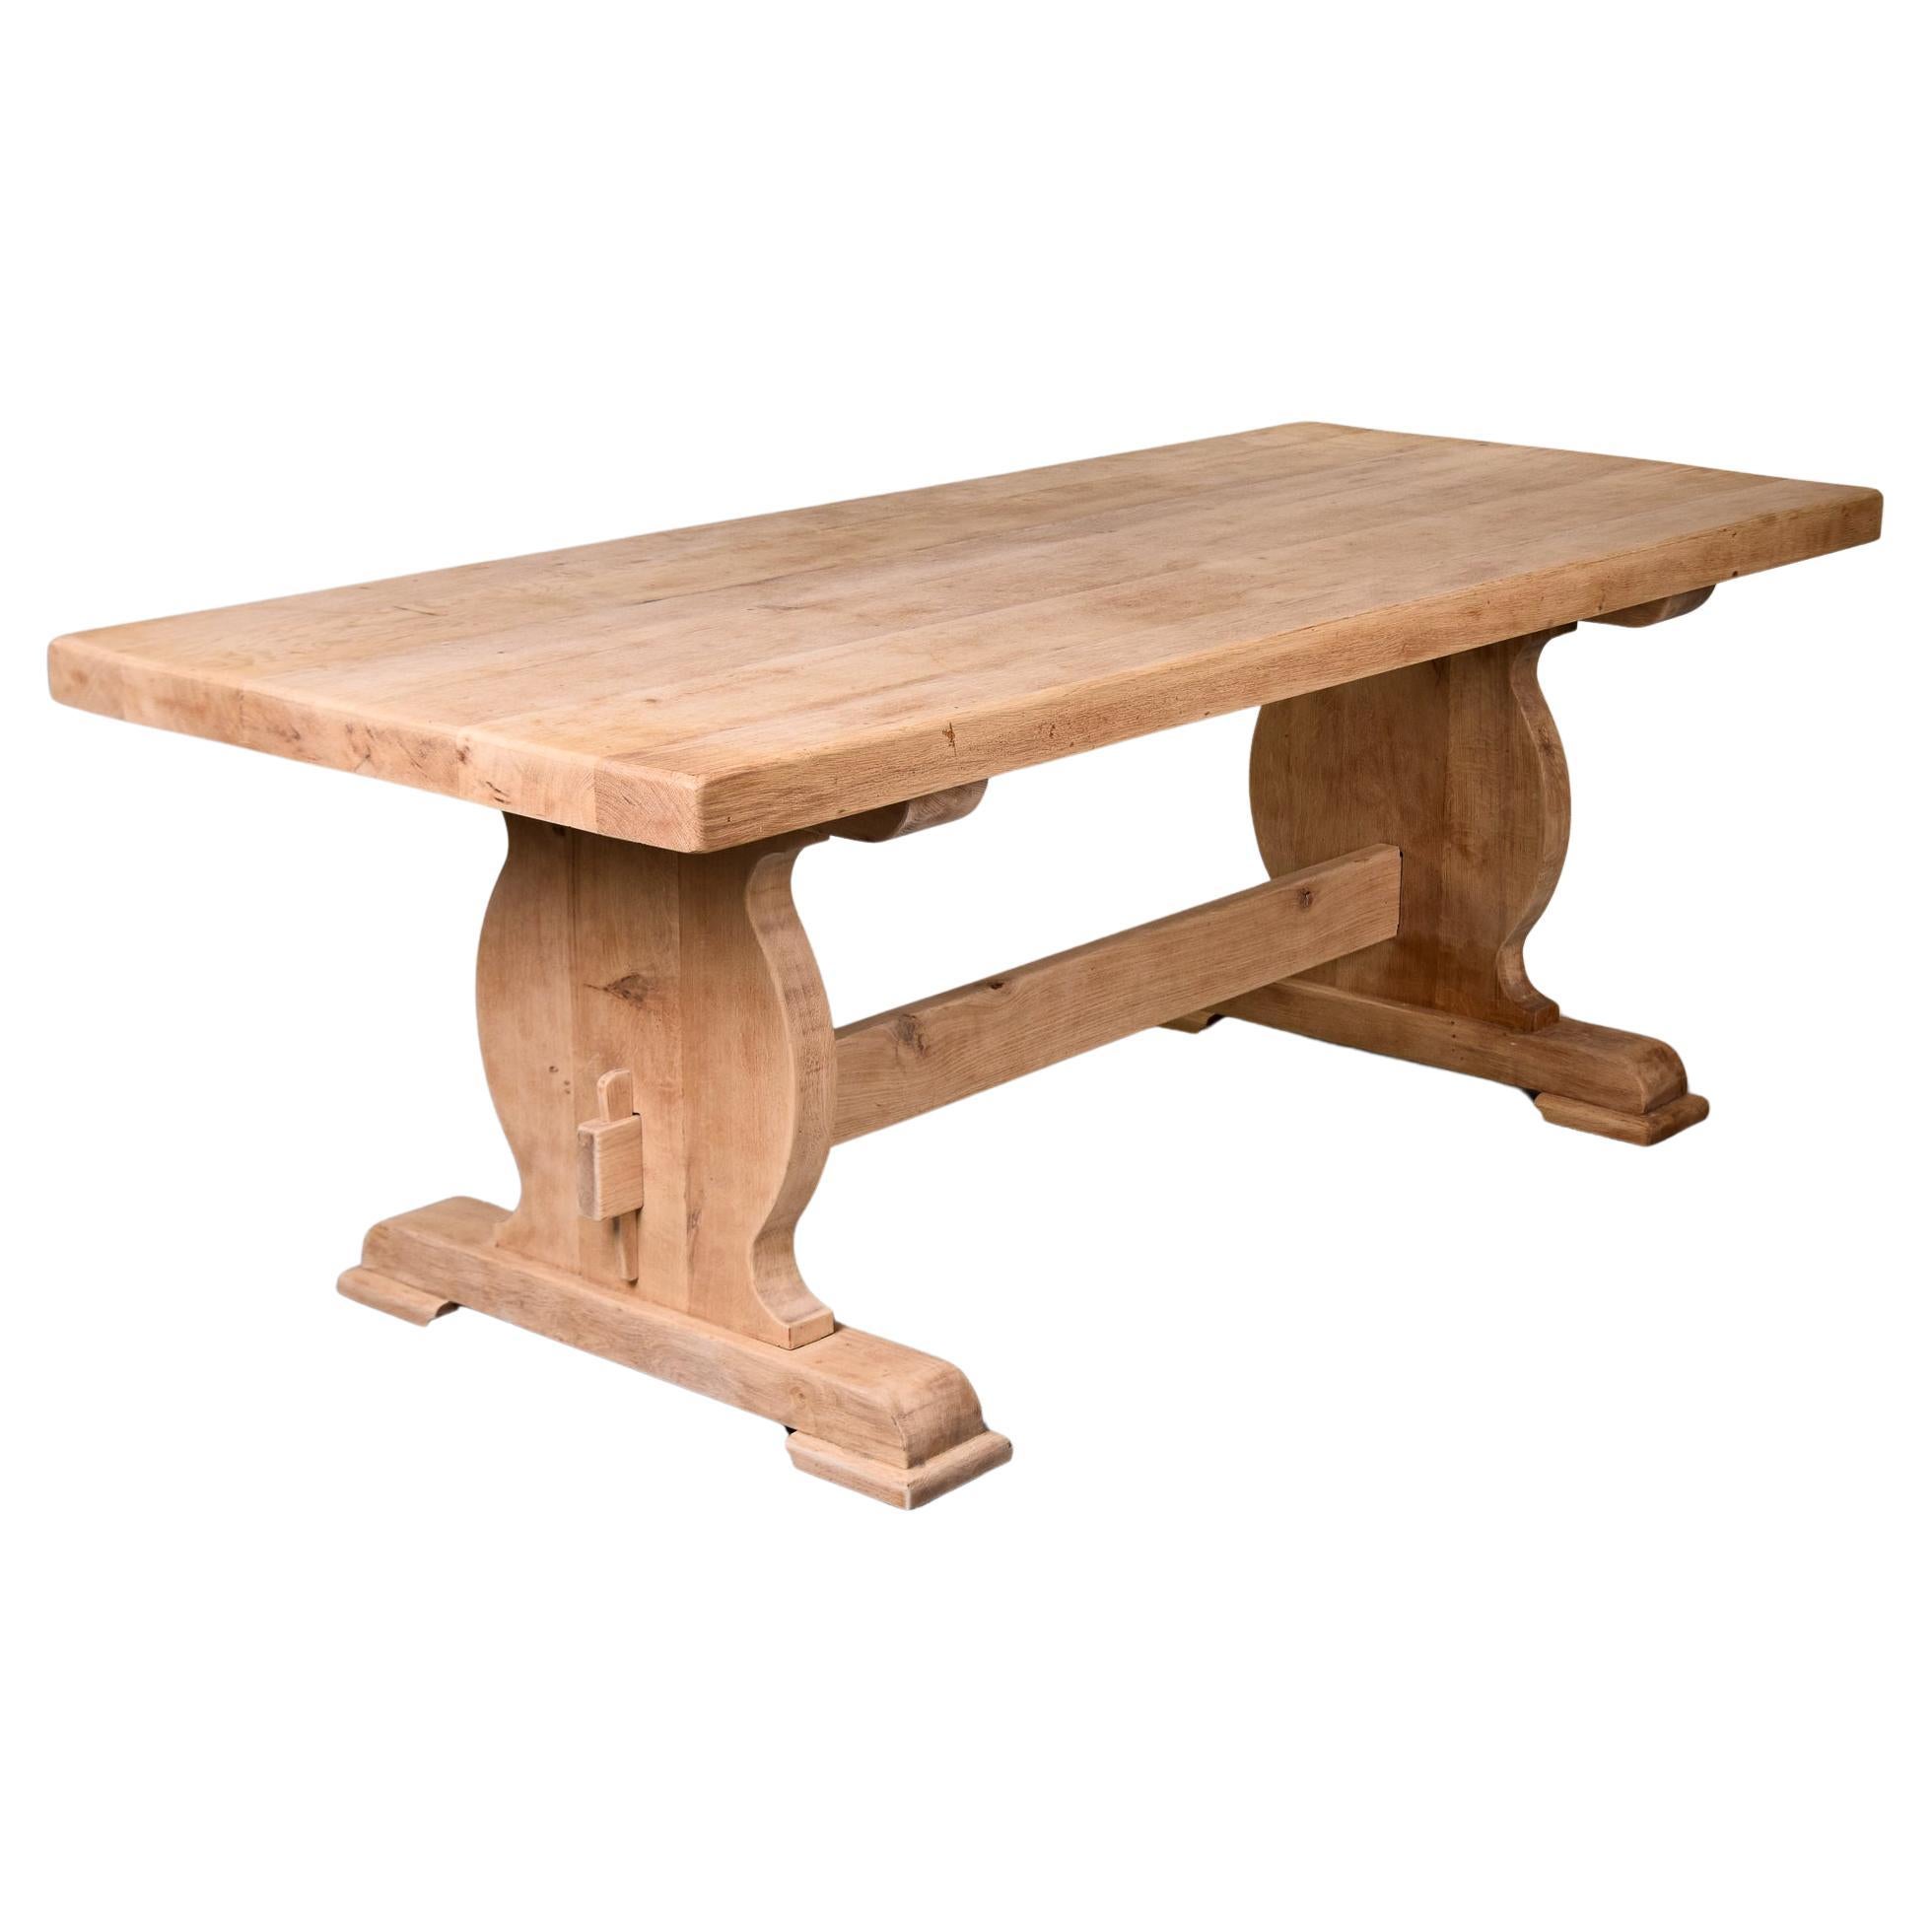 Circa 1900 Sanded Bare Oak French Country Trestle Table For Sale